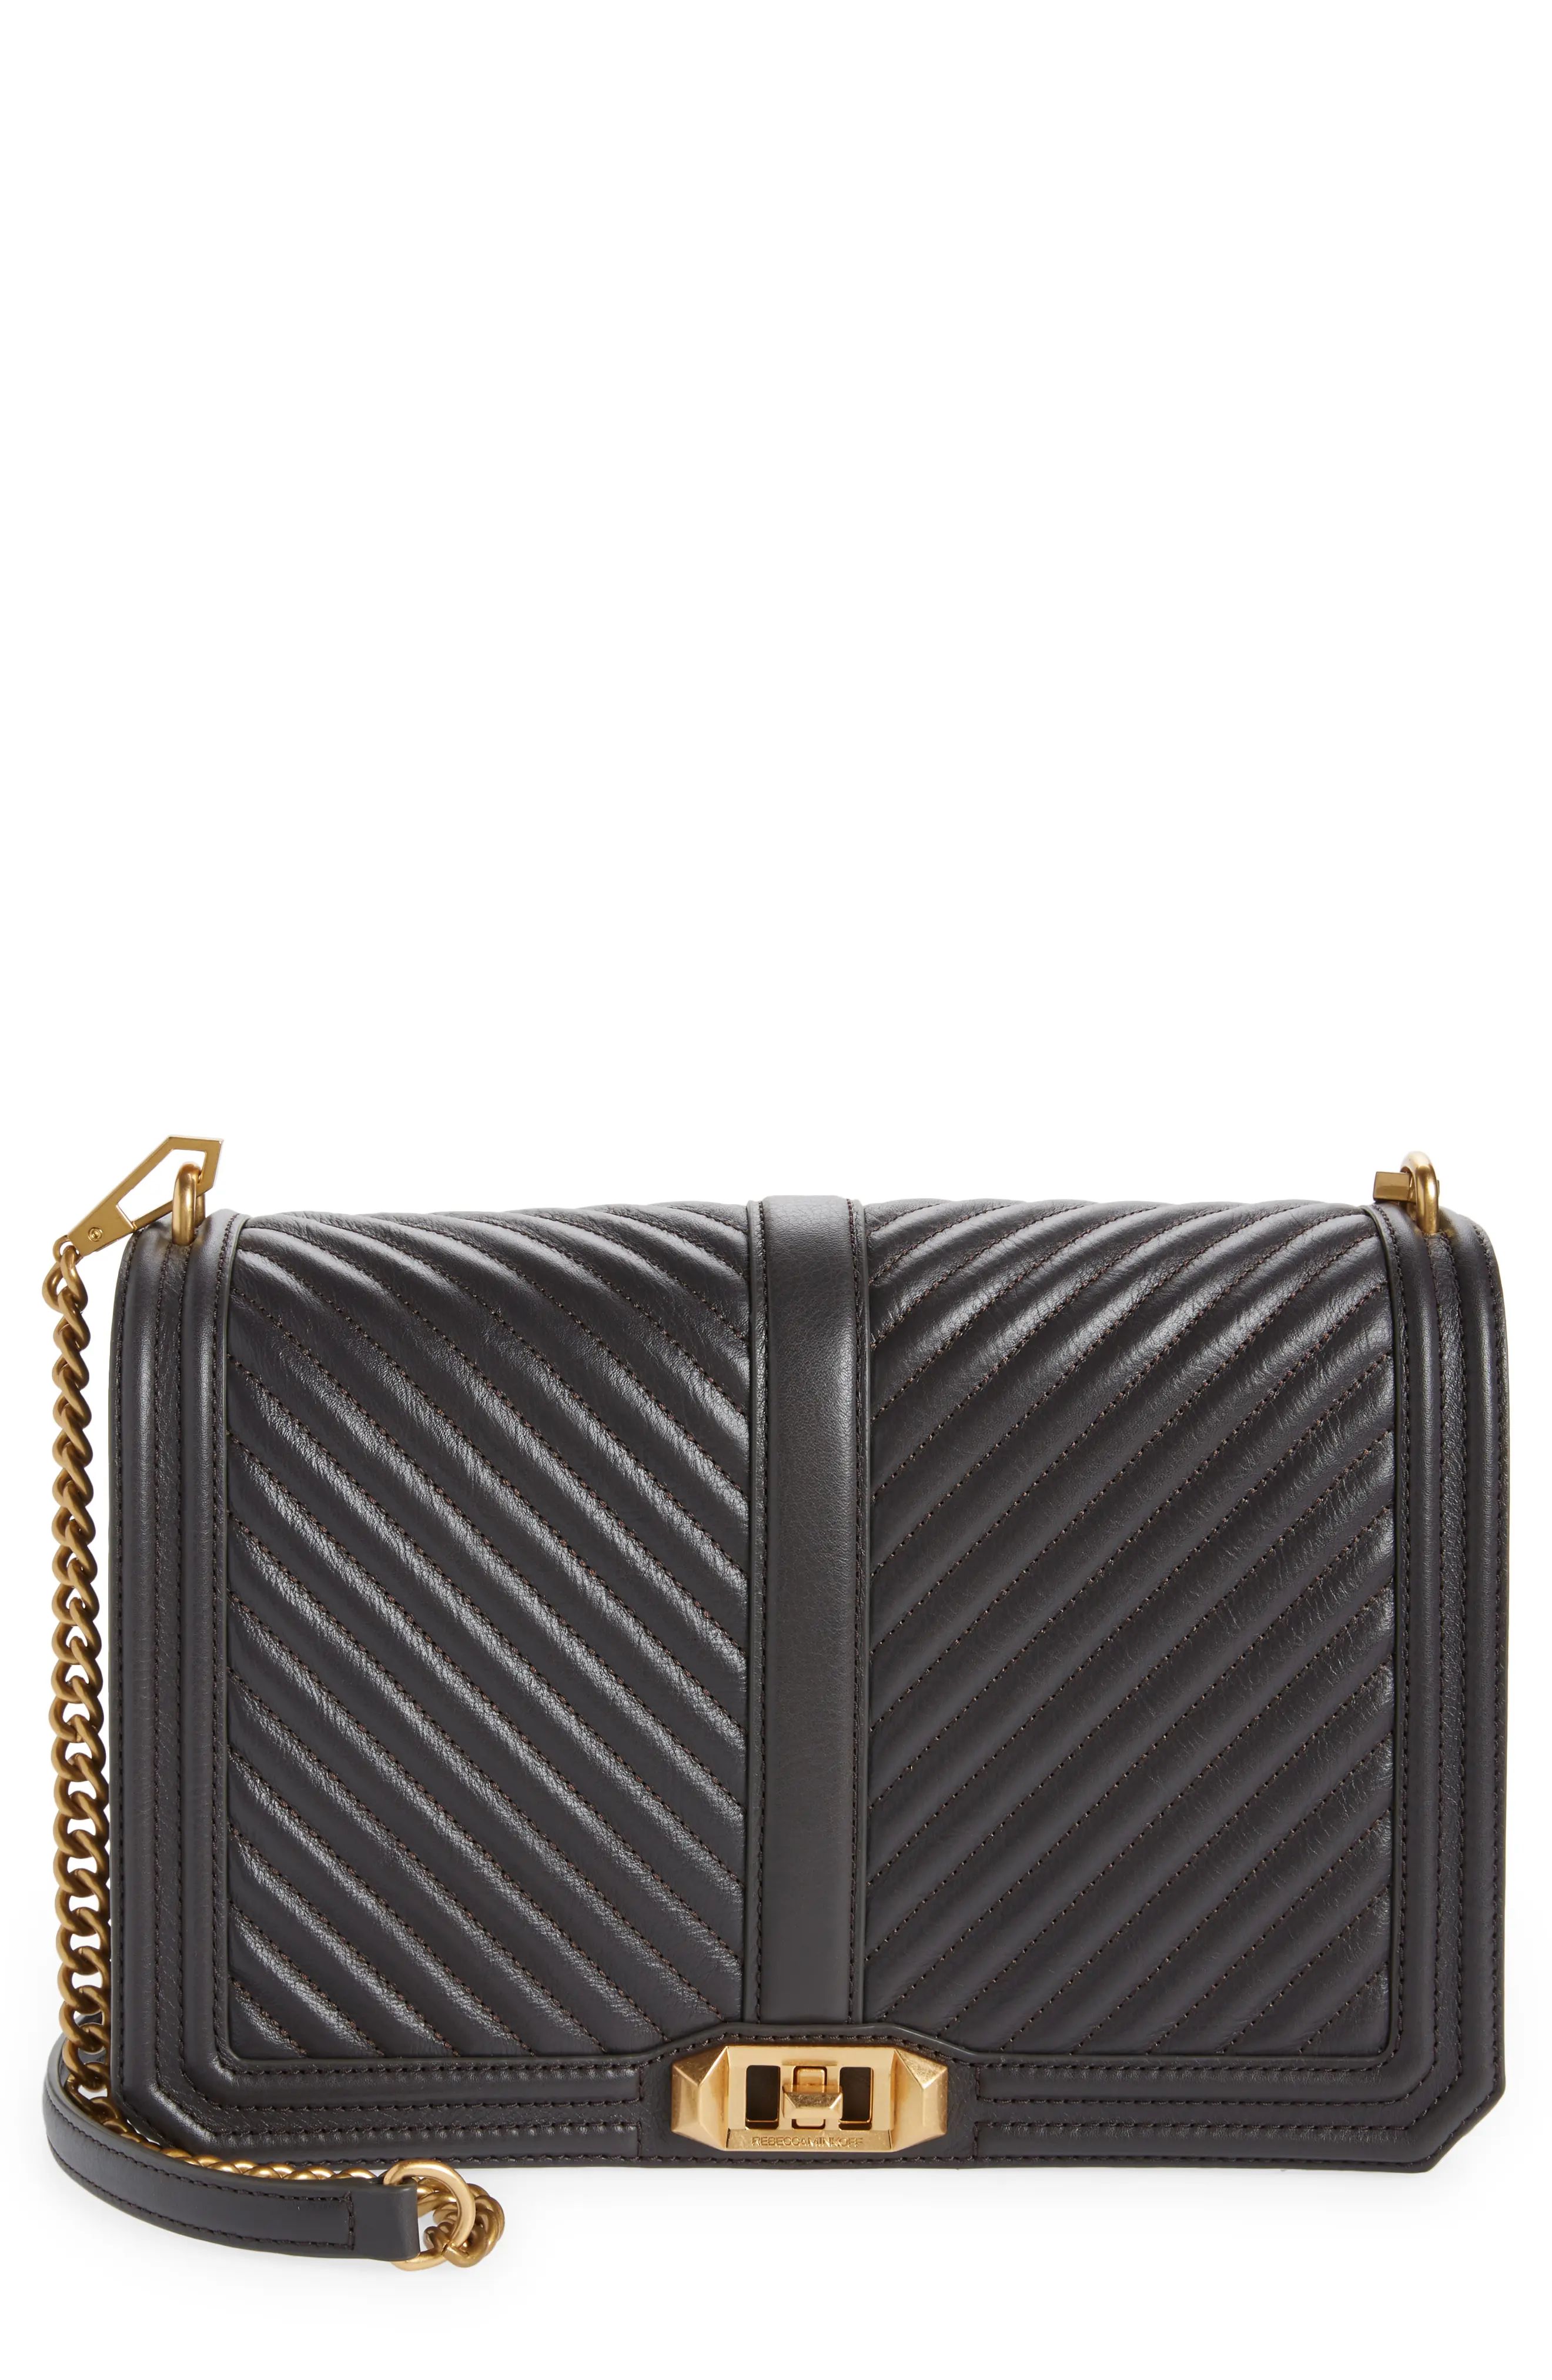 Rebecca Minkoff Chevron Quilted Jumbo Love Crossbody in Graphite at Nordstrom | Nordstrom